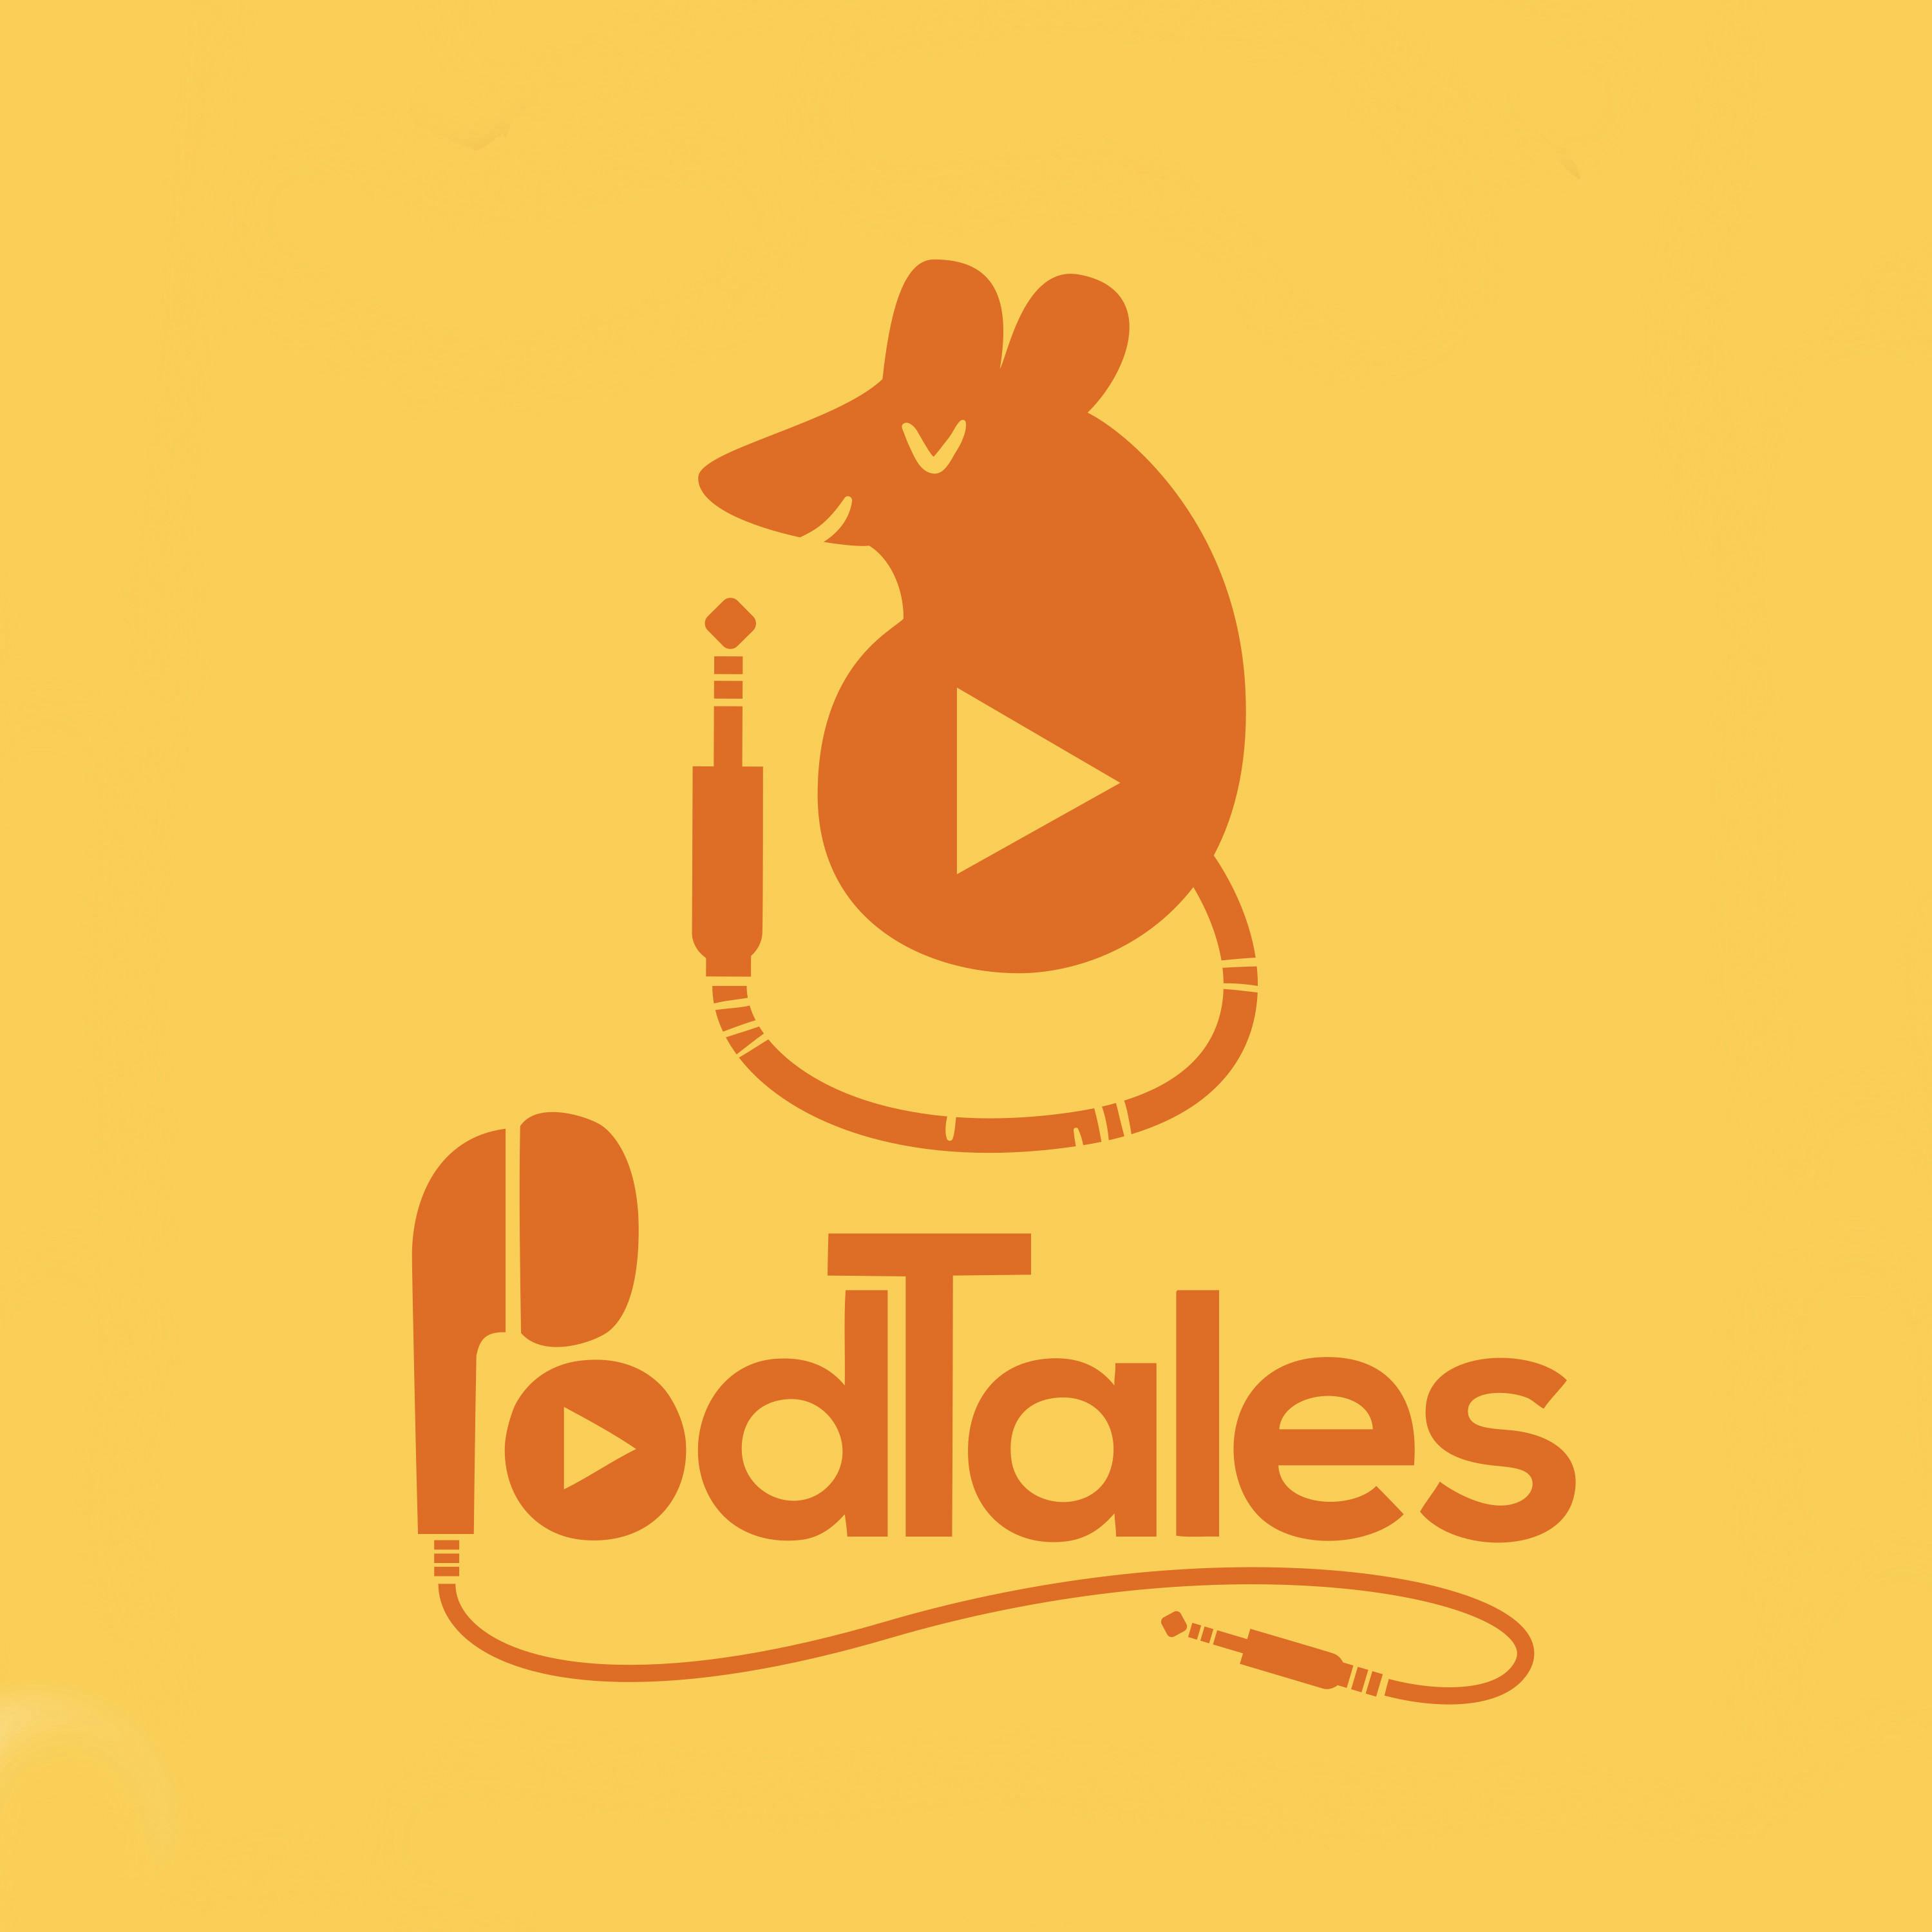 PodTales 2019: Creating Ethical Adult Audio Drama with Tau Zaman